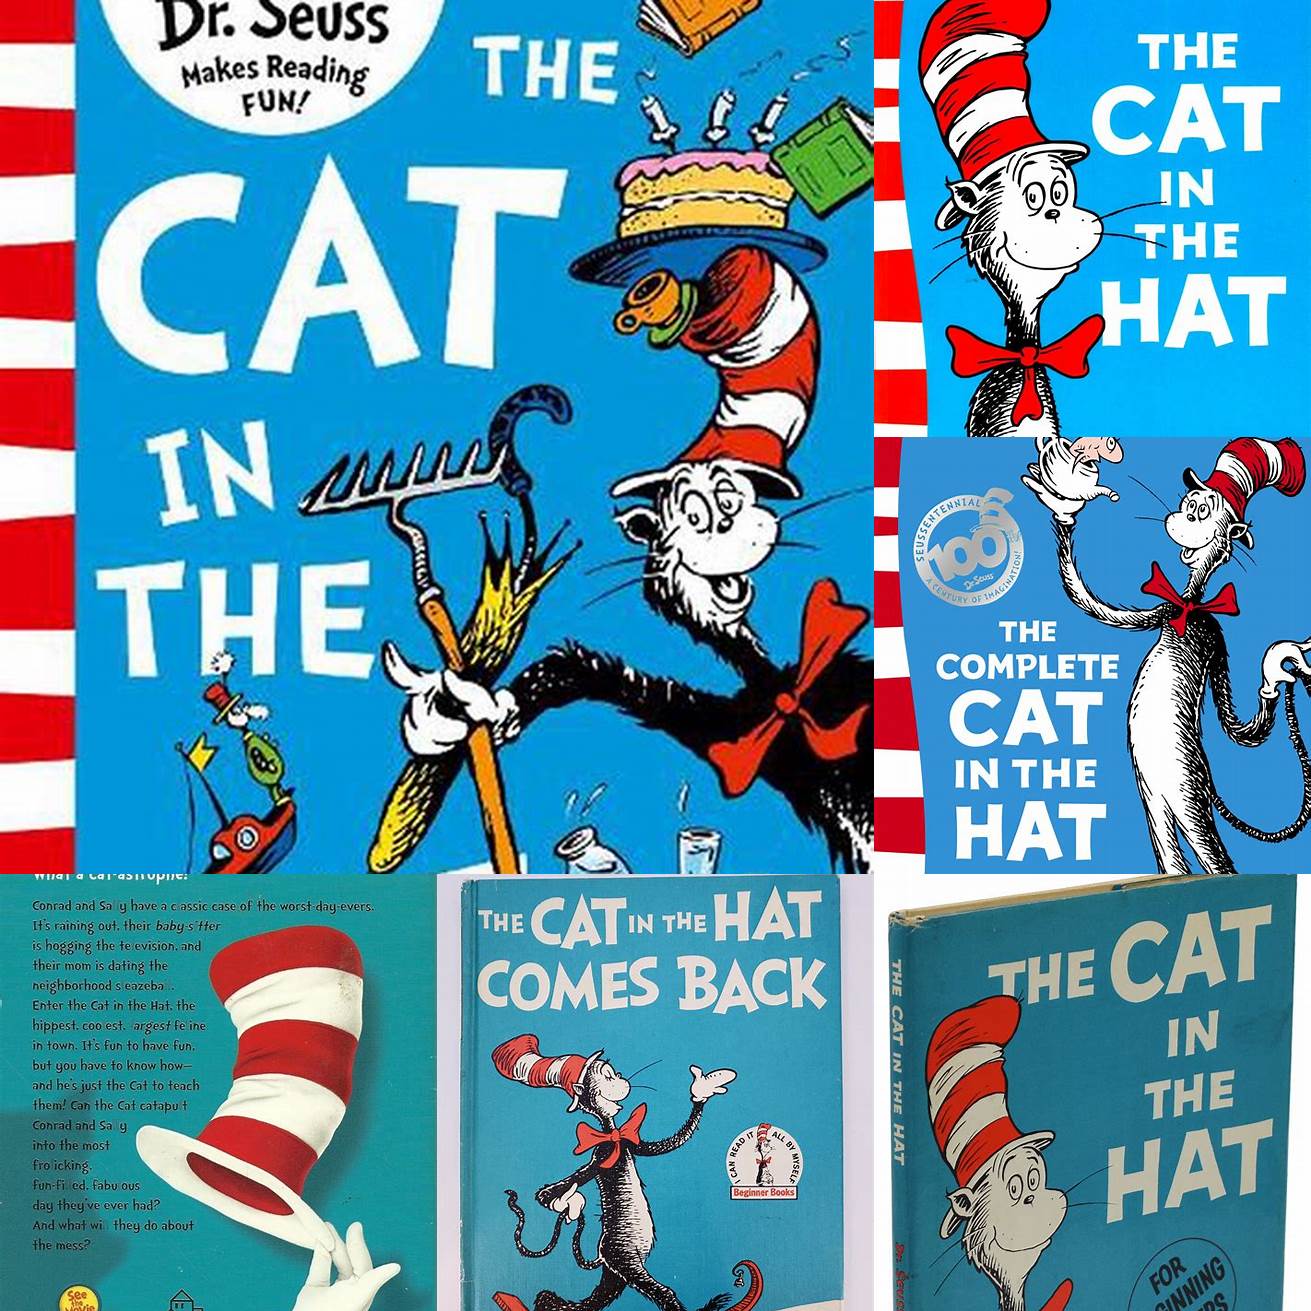 The Cat in the Hat Book